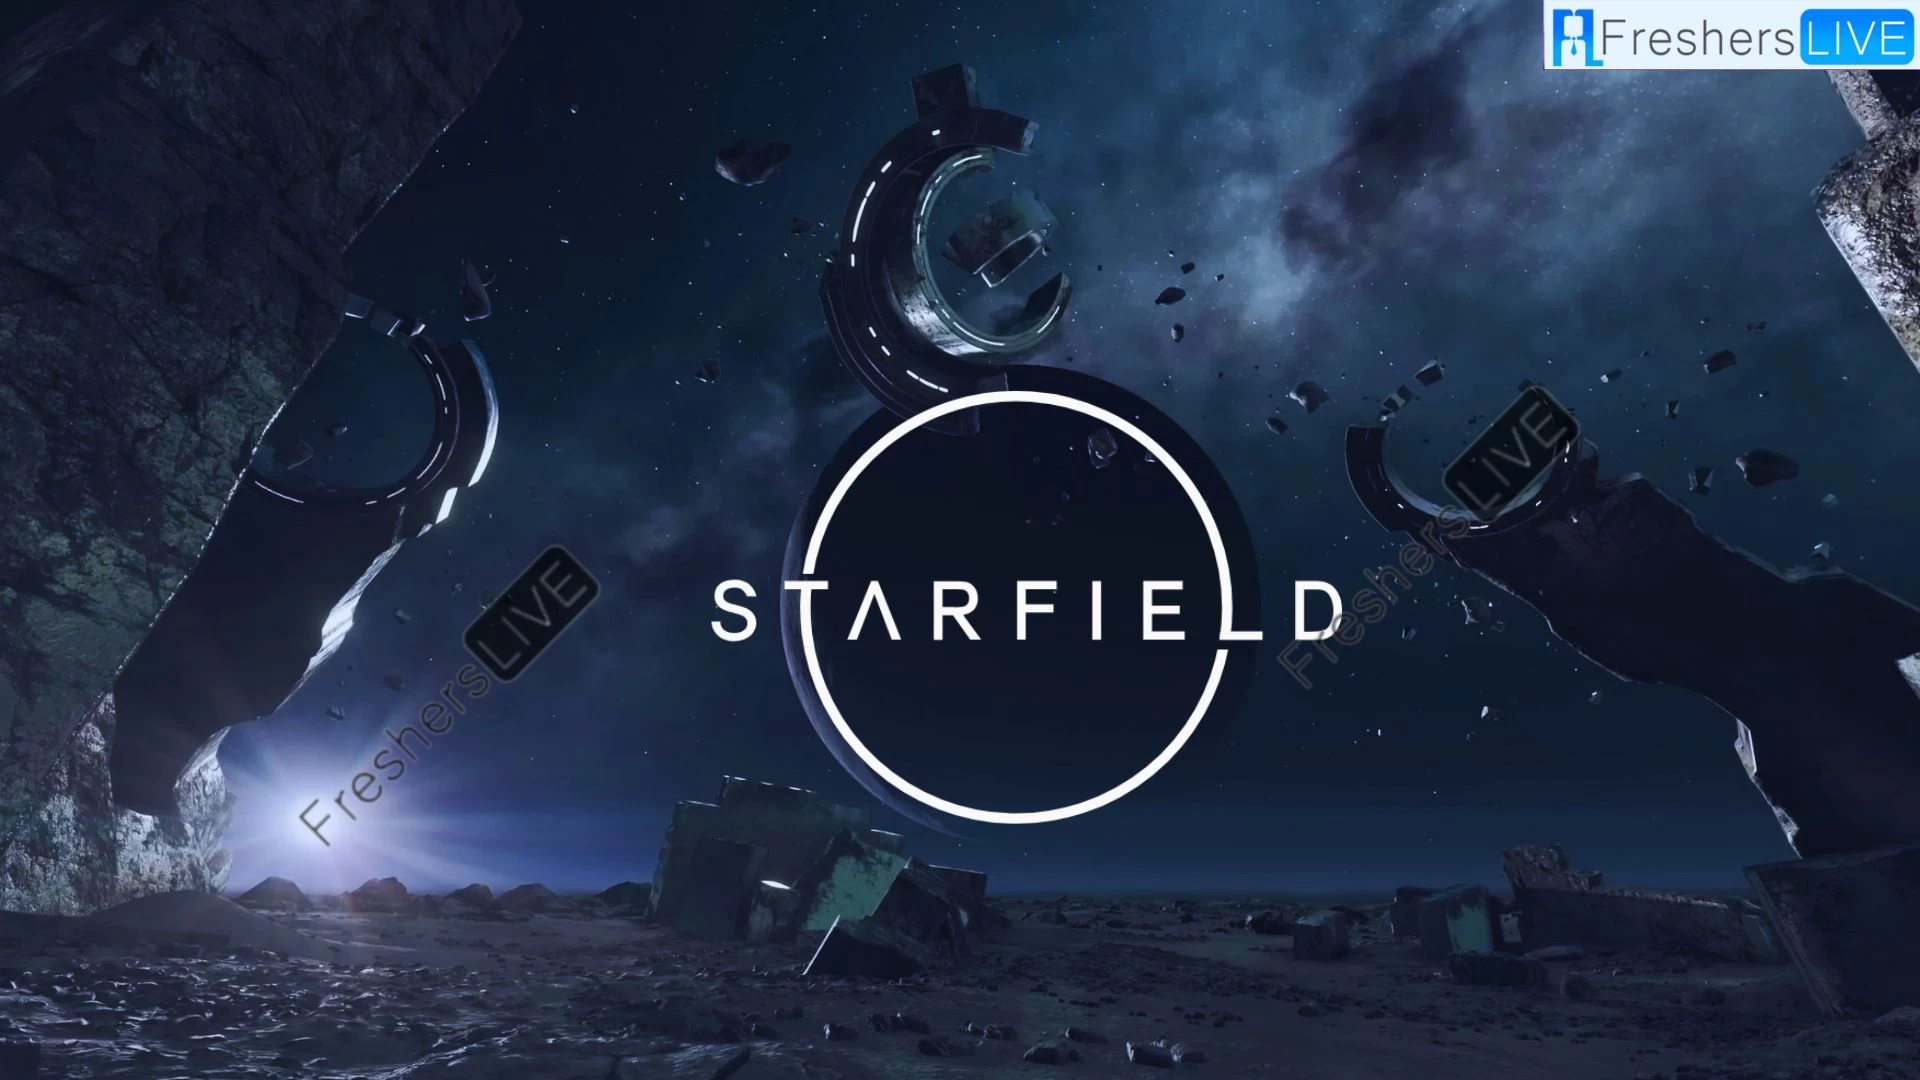 Vanguard Motto Meaning Starfield, What is the Vanguard Motto in Starfield?